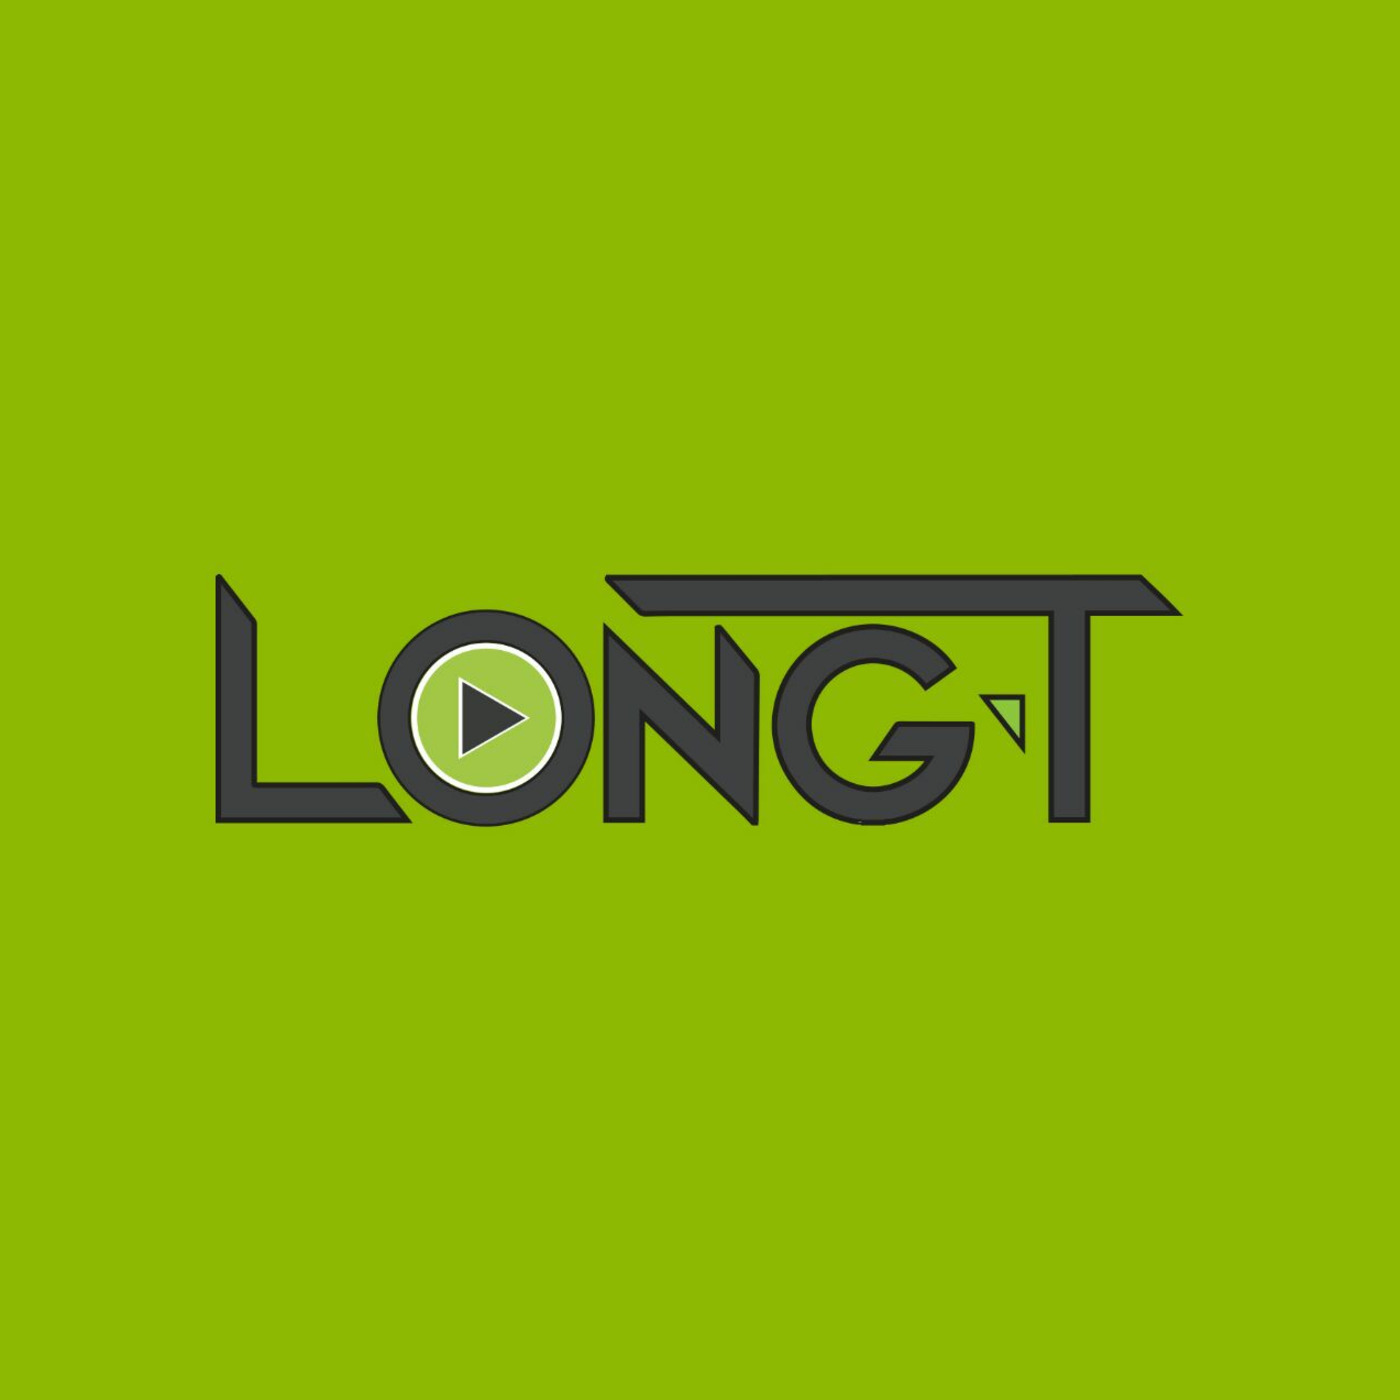 Long T Podcast